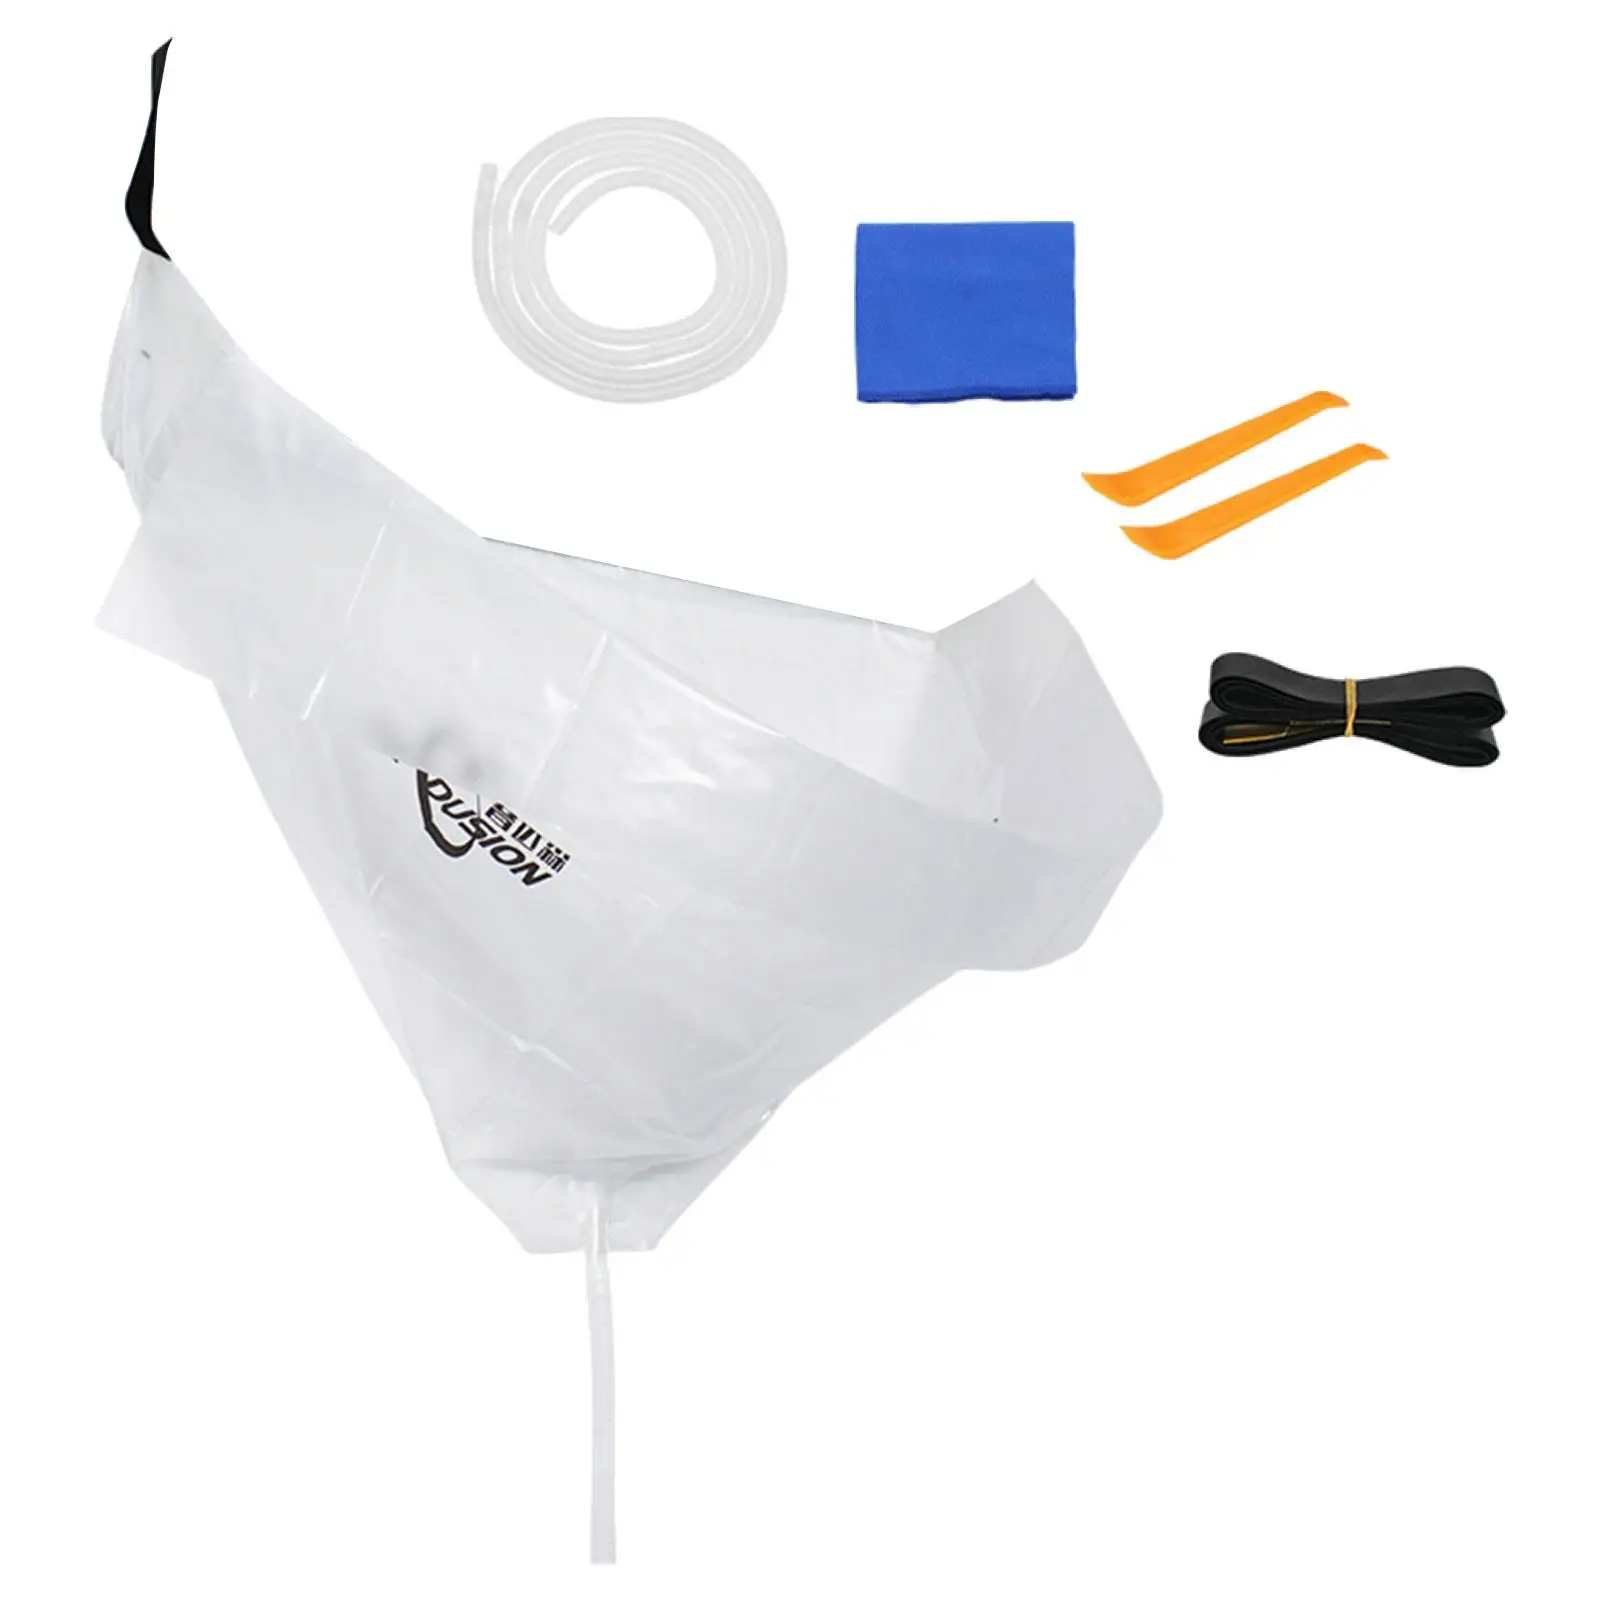 Air Conditioning Cleaning Cover Bag with Water Pipe Upgrade Drain Outlet Air Conditioner Wash Service Bag for Hotel Shop